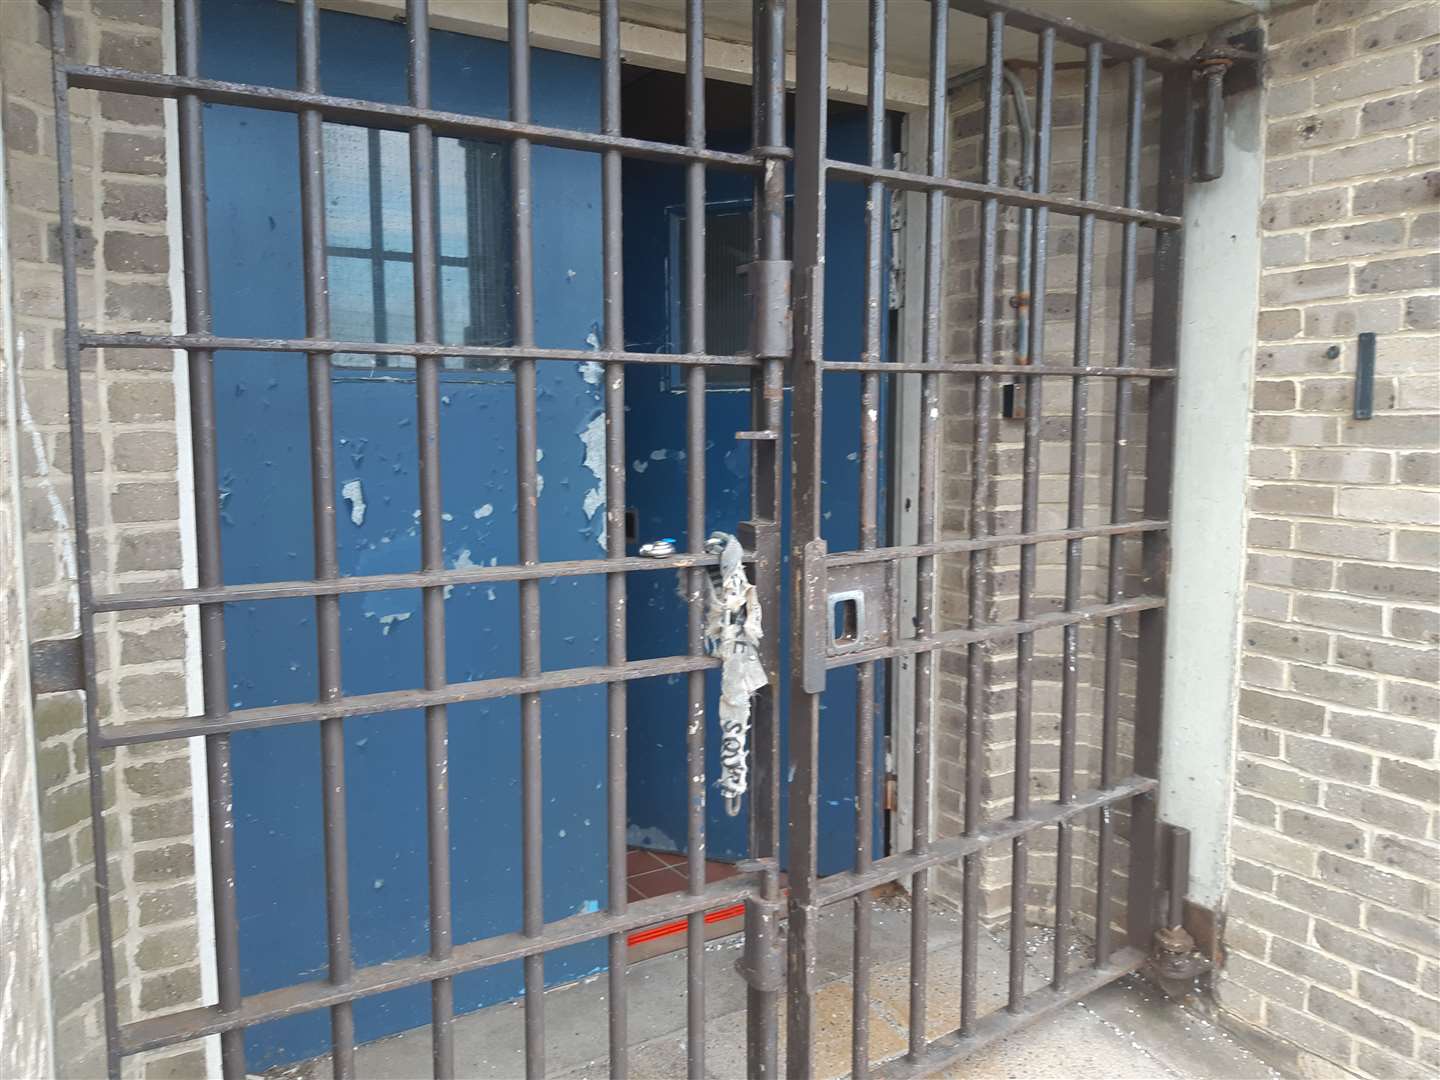 The slammer... The bars at the prison blocks are still there. Picture: Sam Lennon KMG